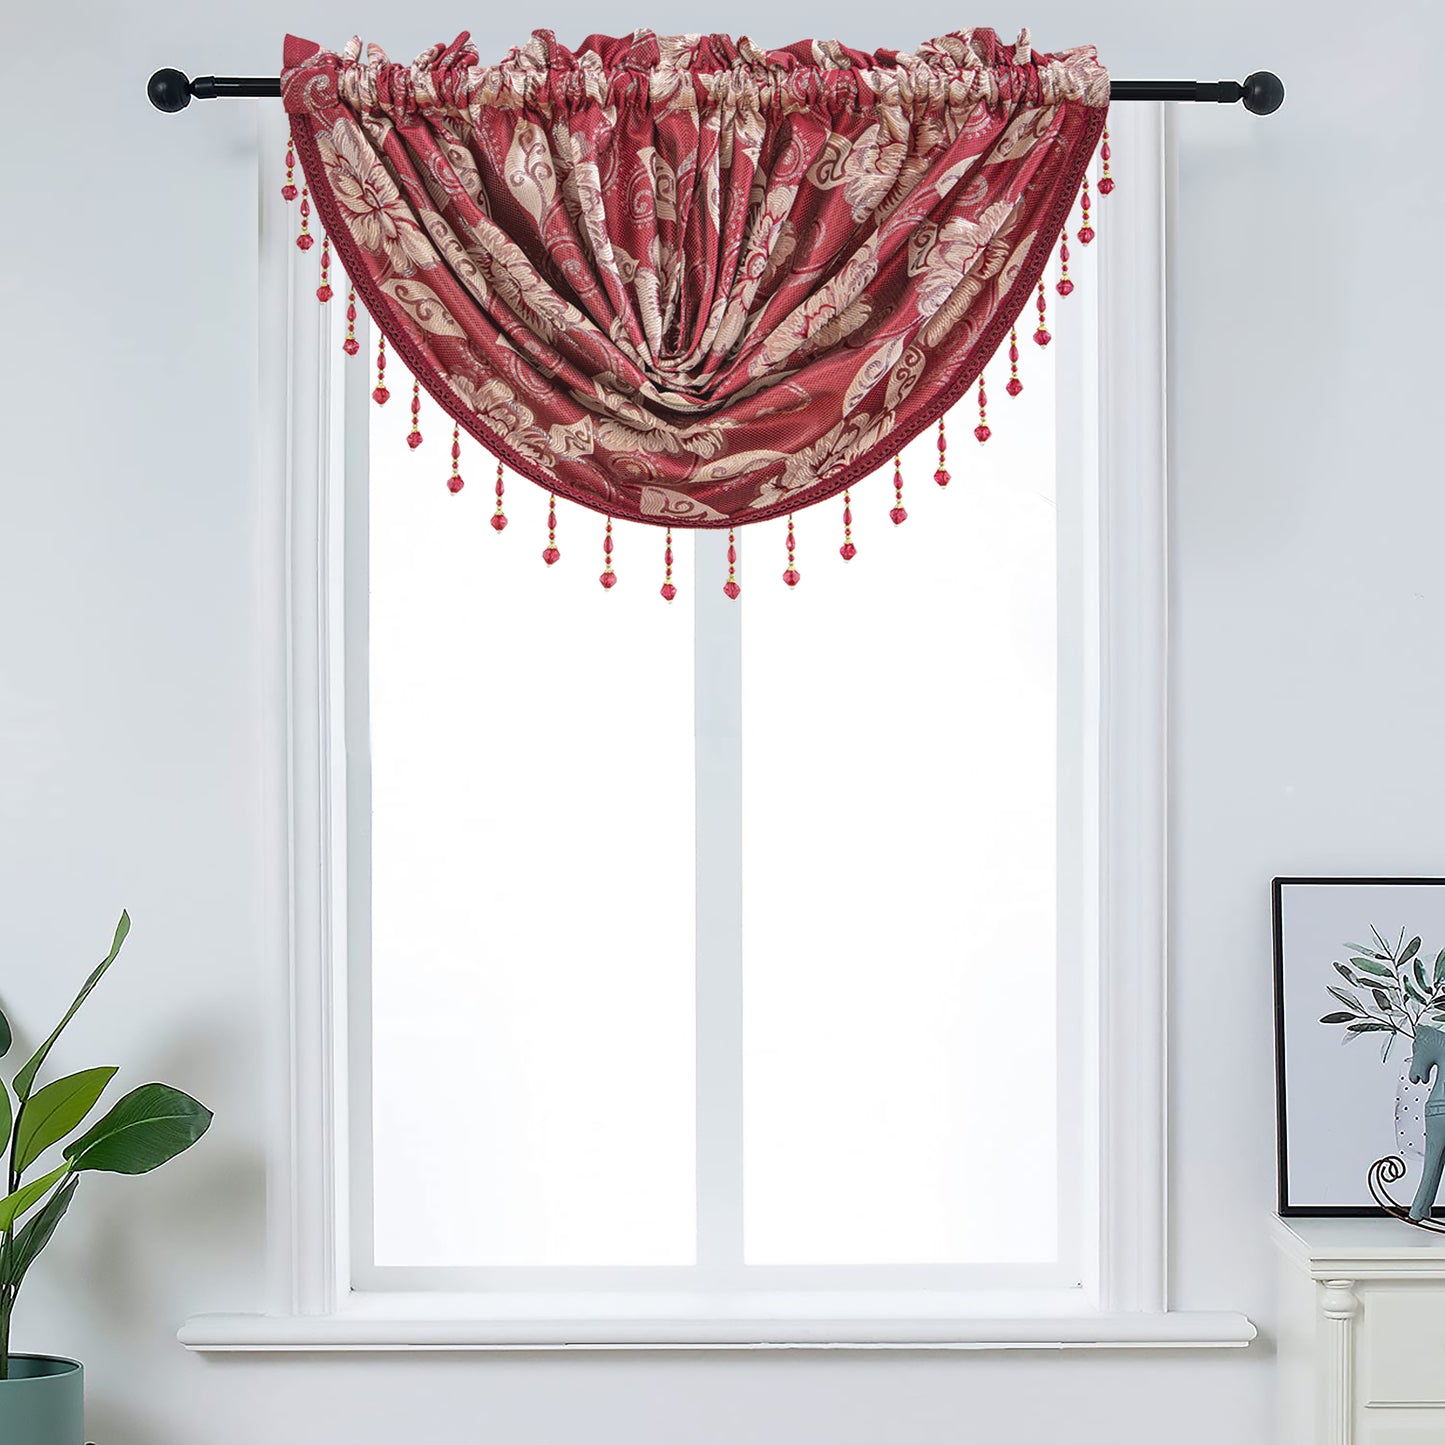 Cassie - Embroidered Macrame Jacquard Panel - Valance sold separately - Glory Home Design